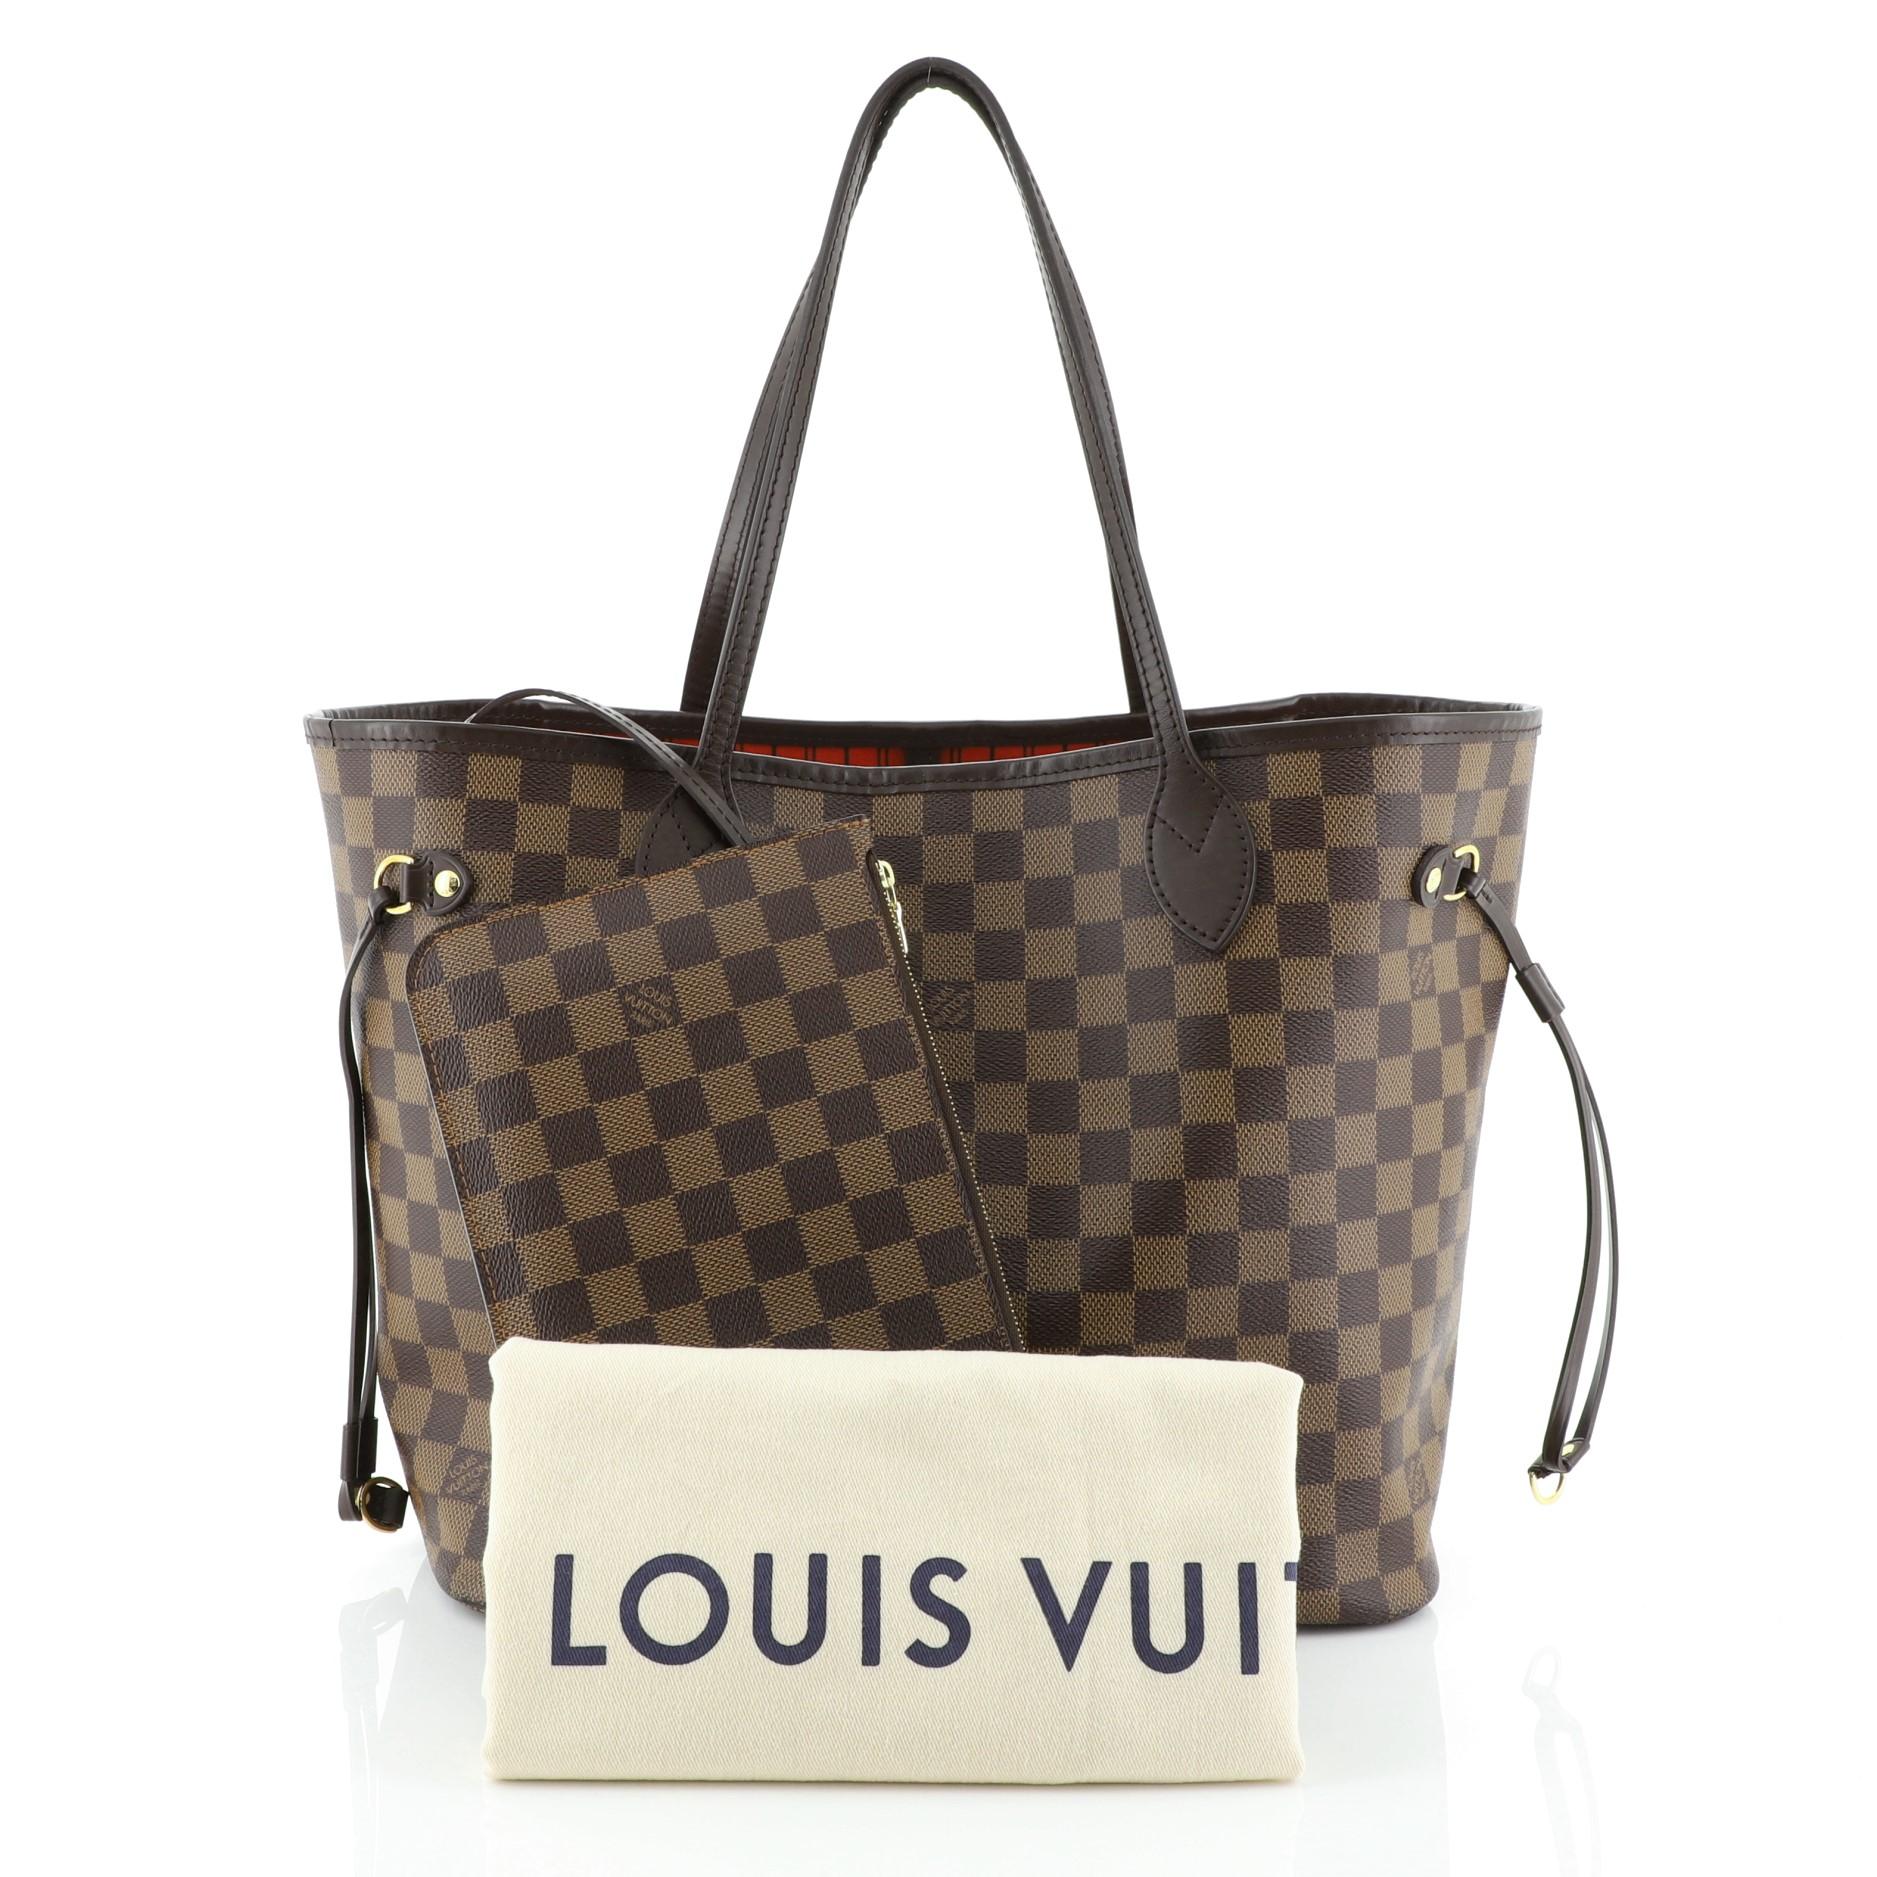 This Louis Vuitton Neverfull NM Tote Damier MM, crafted in damier ebene coated canvas, features dual slim handles, side laces, and gold-tone hardware. Its wide open top showcases a red fabric interior with side zip pocket. Authenticity code reads: